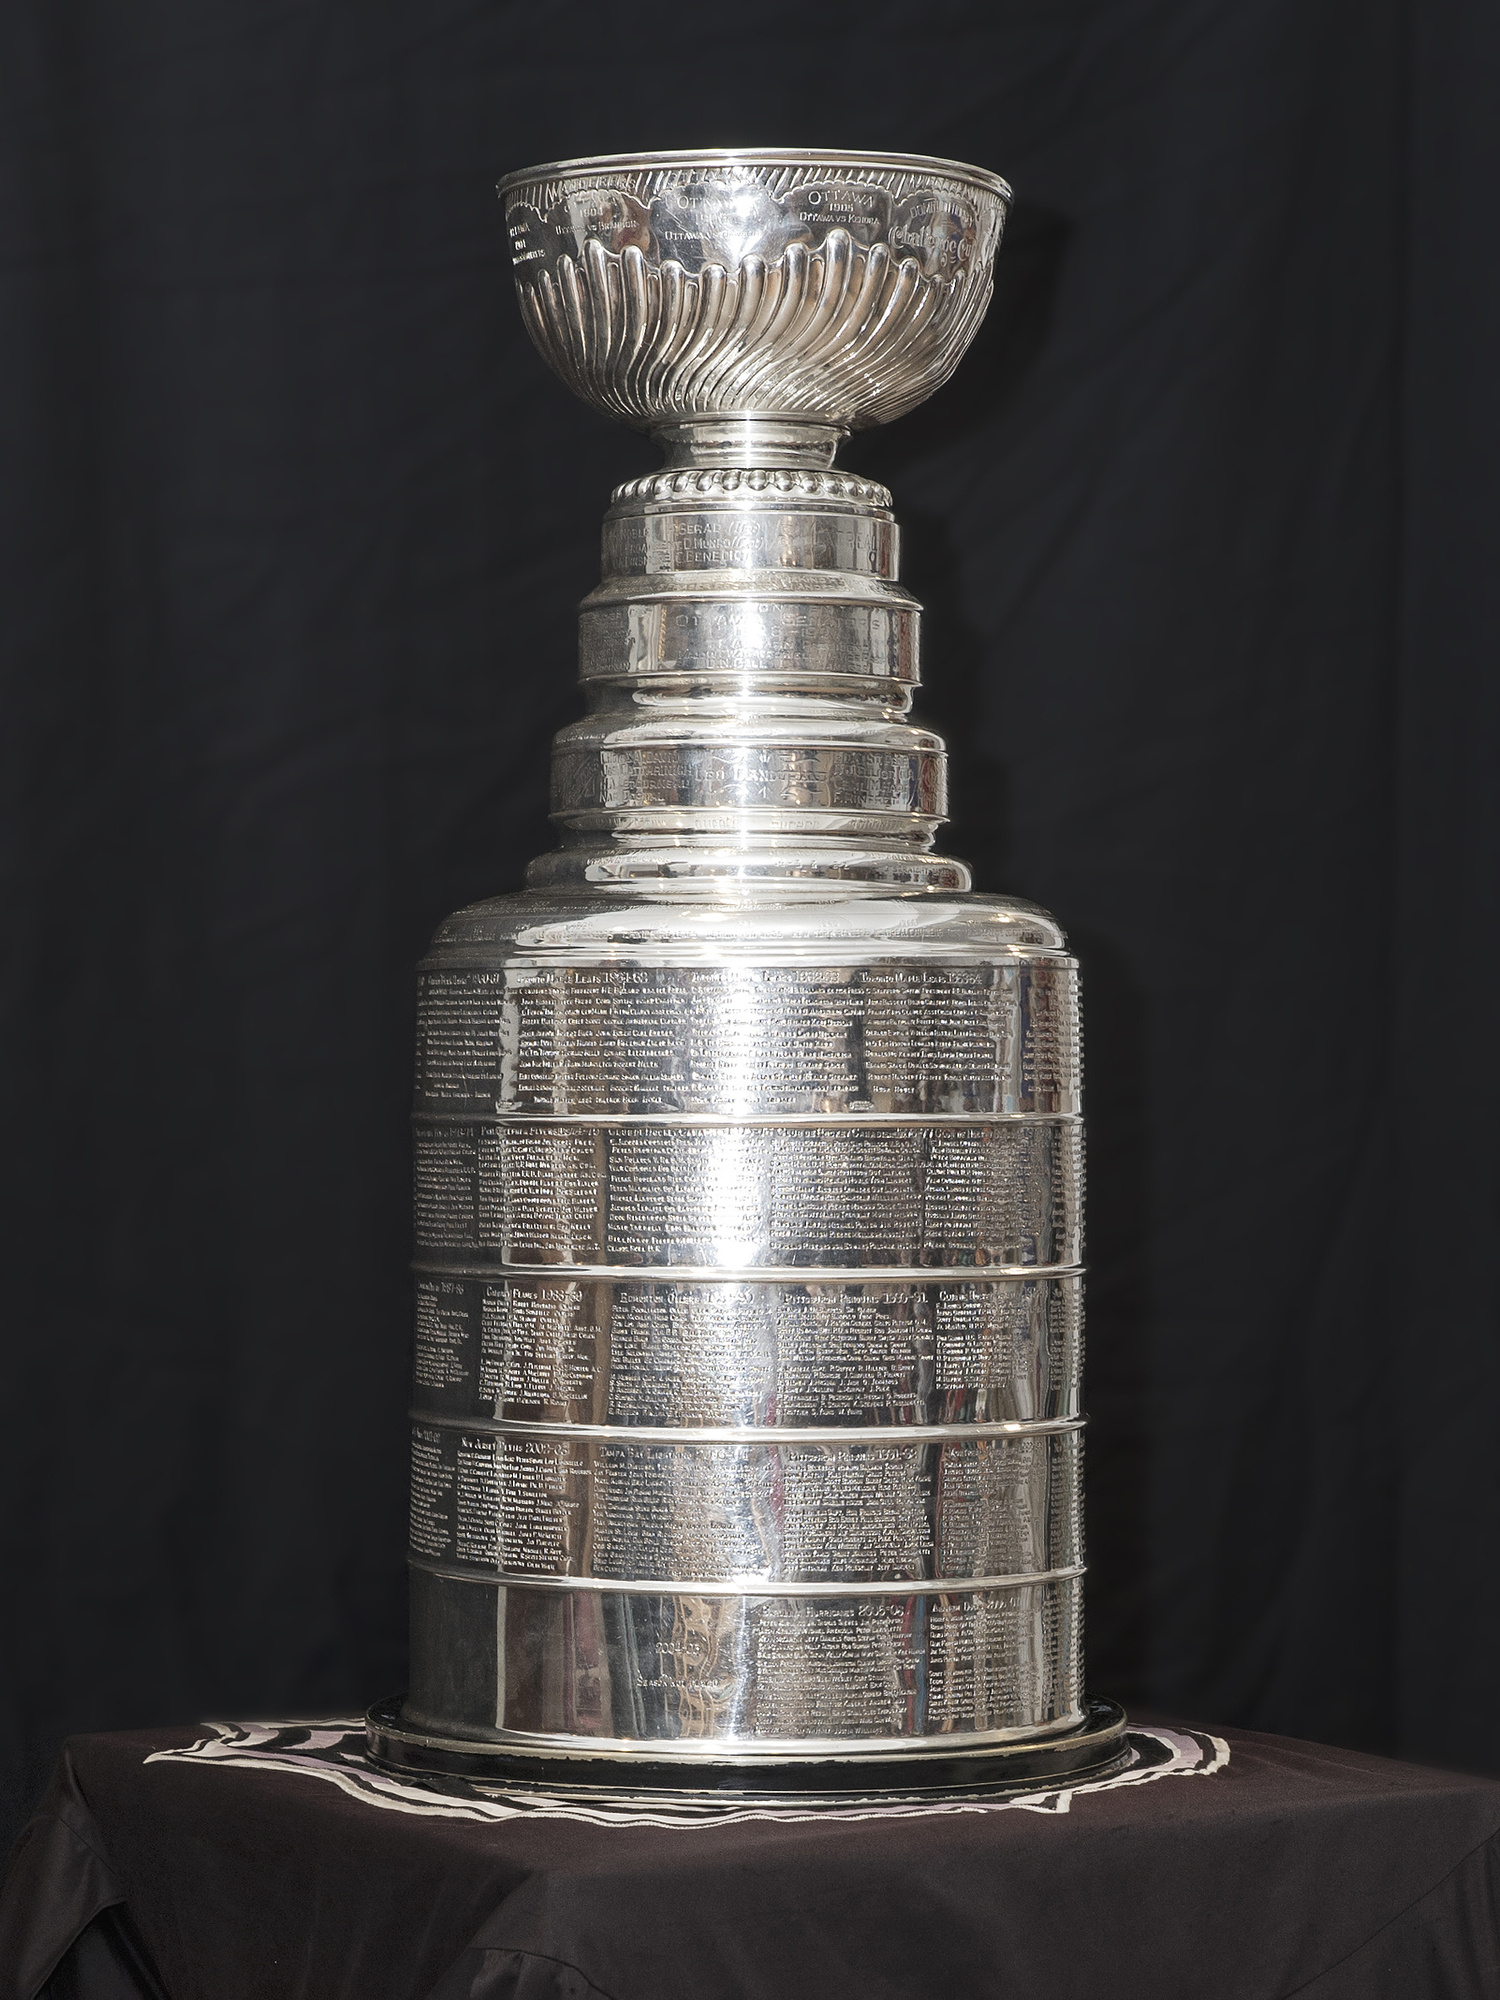 15 Cool Stanley Cup Facts You Should Know Before the Finals